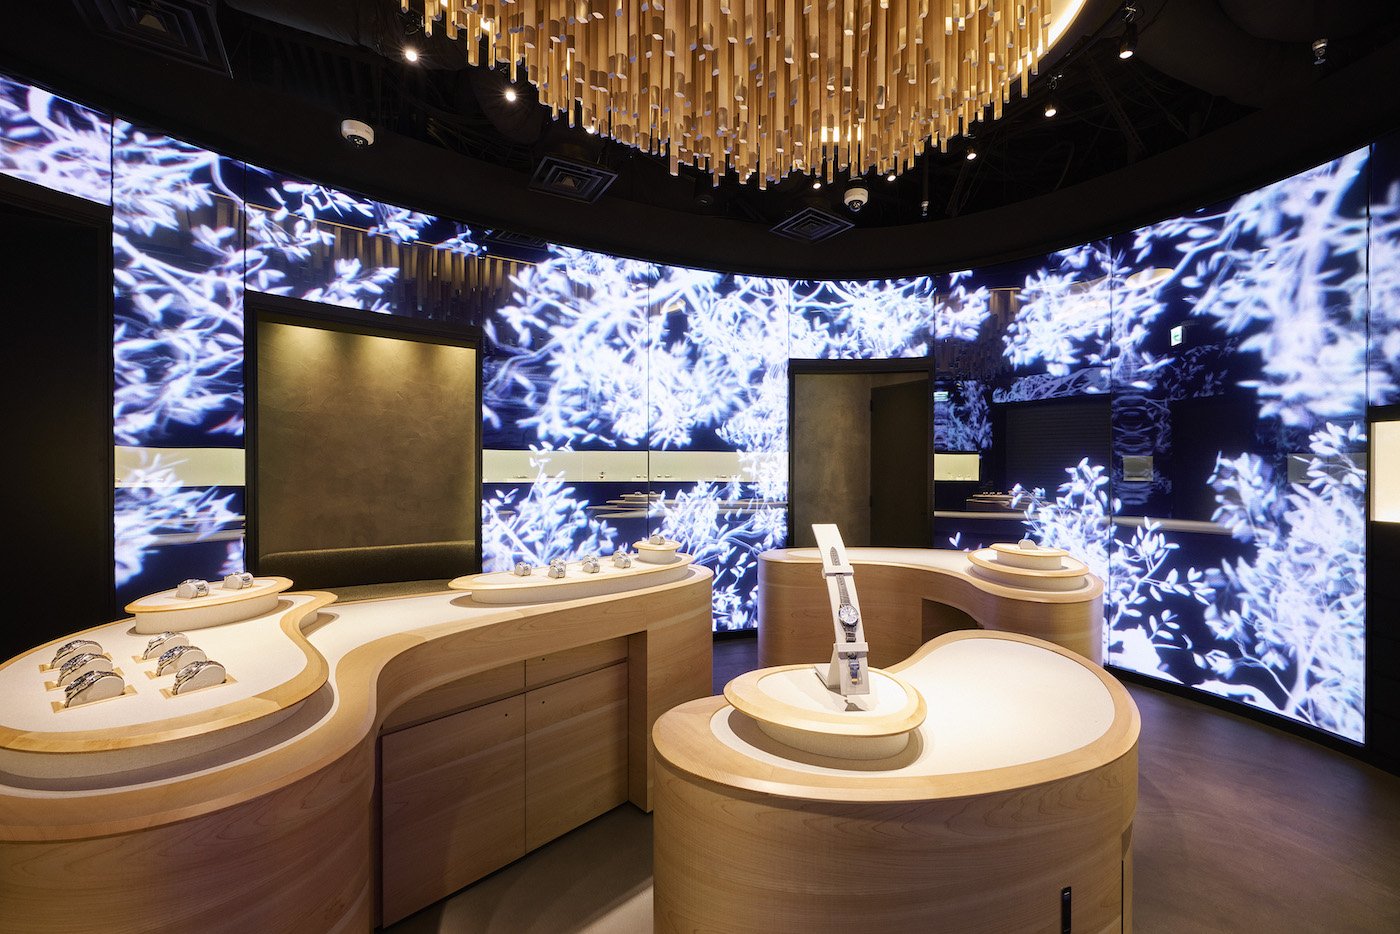 Grand Seiko opens a new boutique and museum in Tokyo